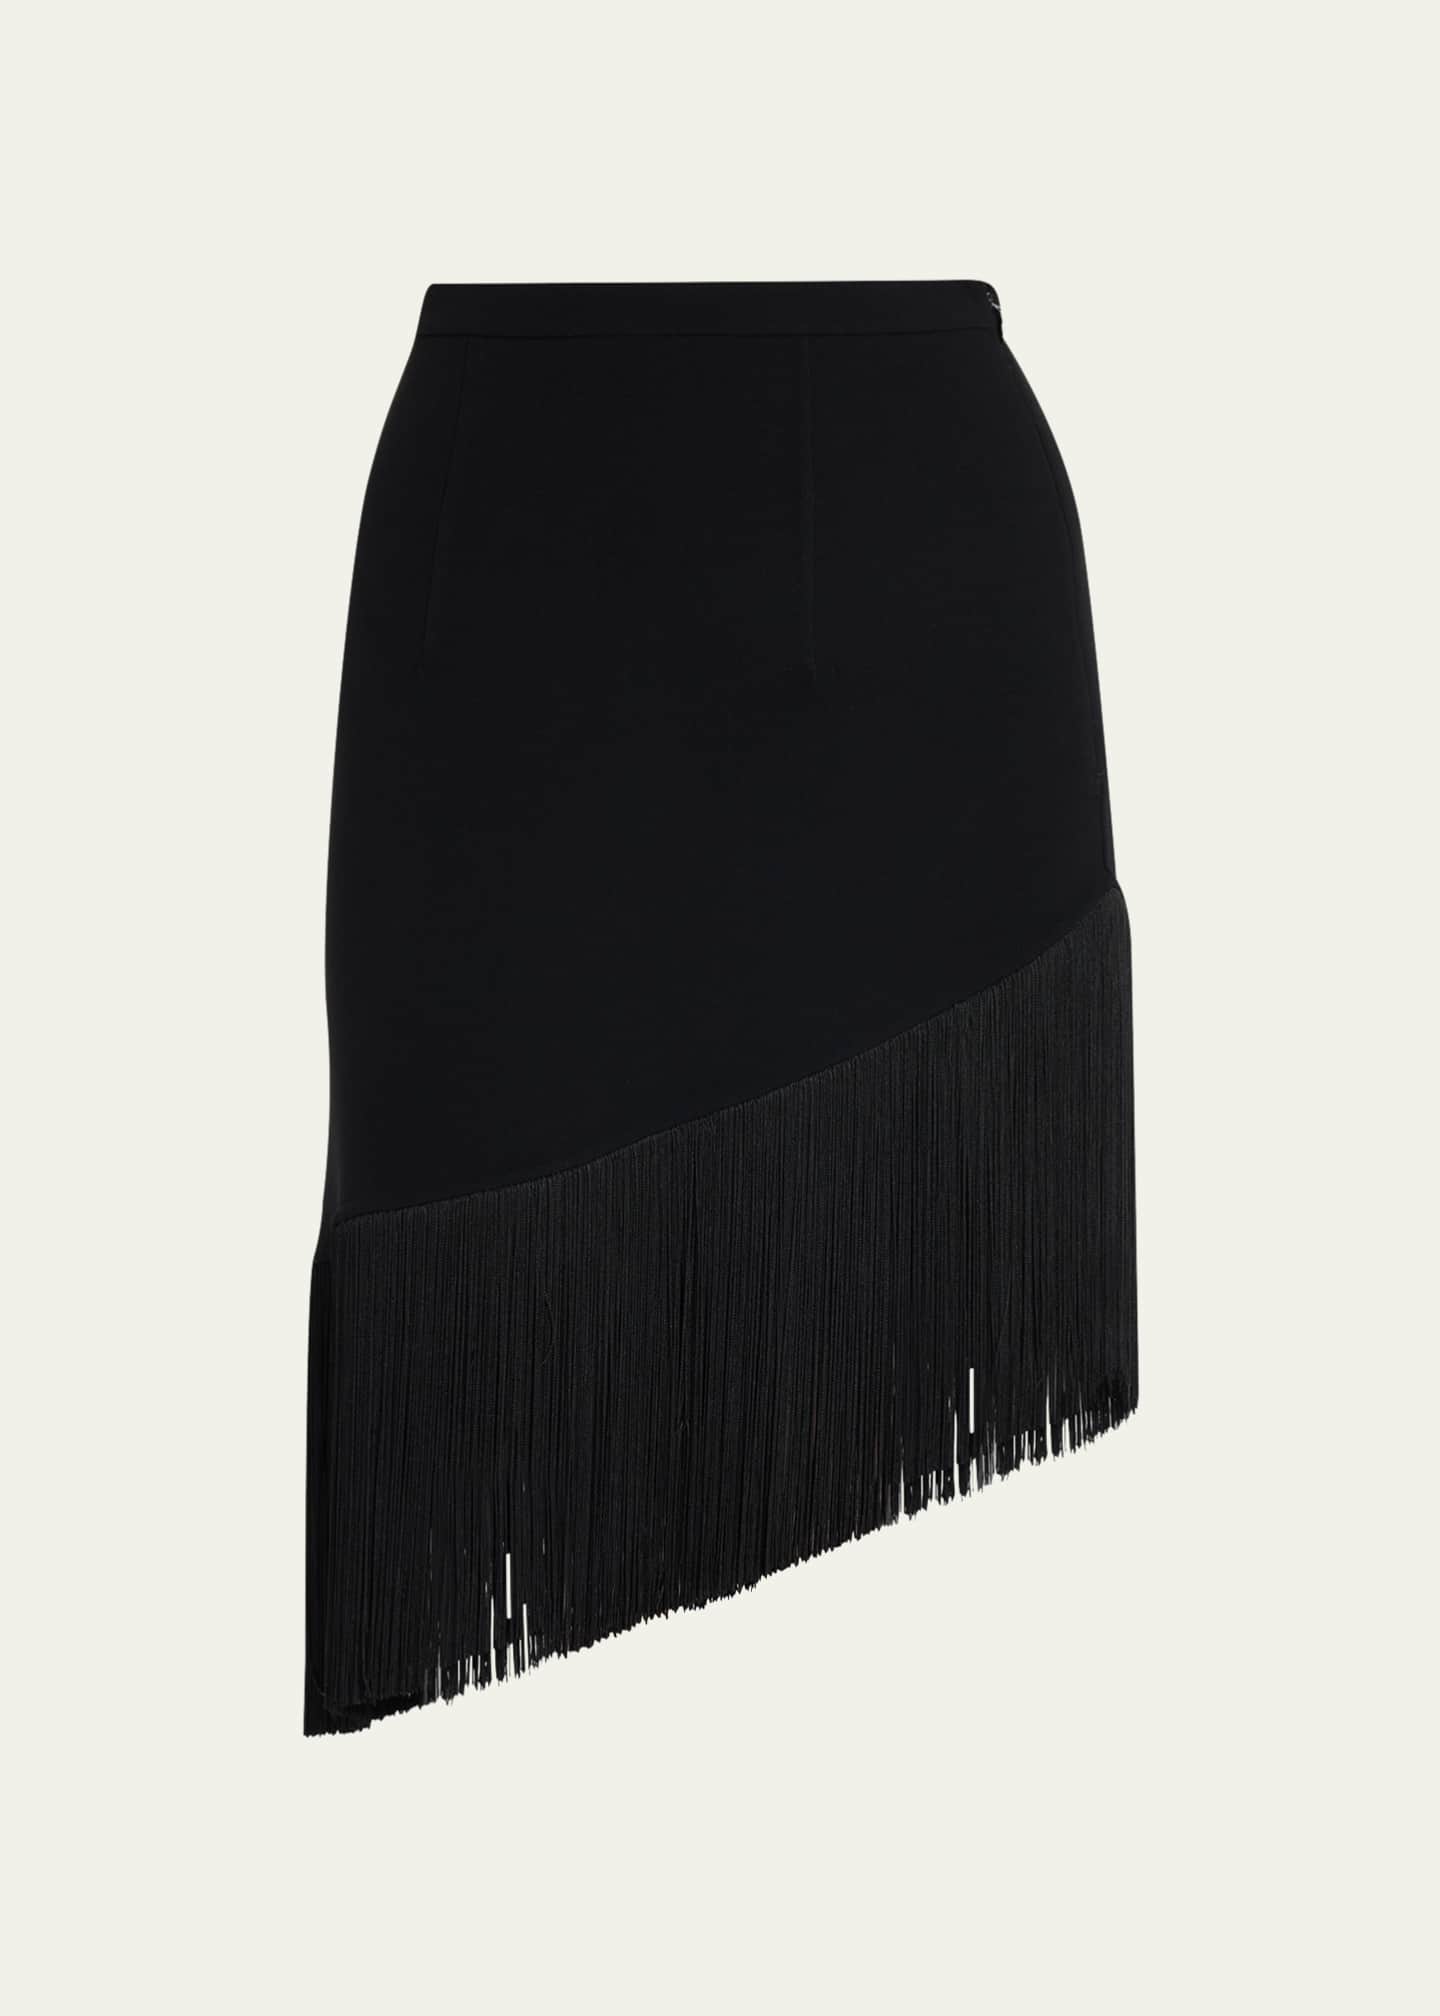 Michael Kors Collection Asymmetric Pencil Skirt with Fringe Trim Image 1 of 4